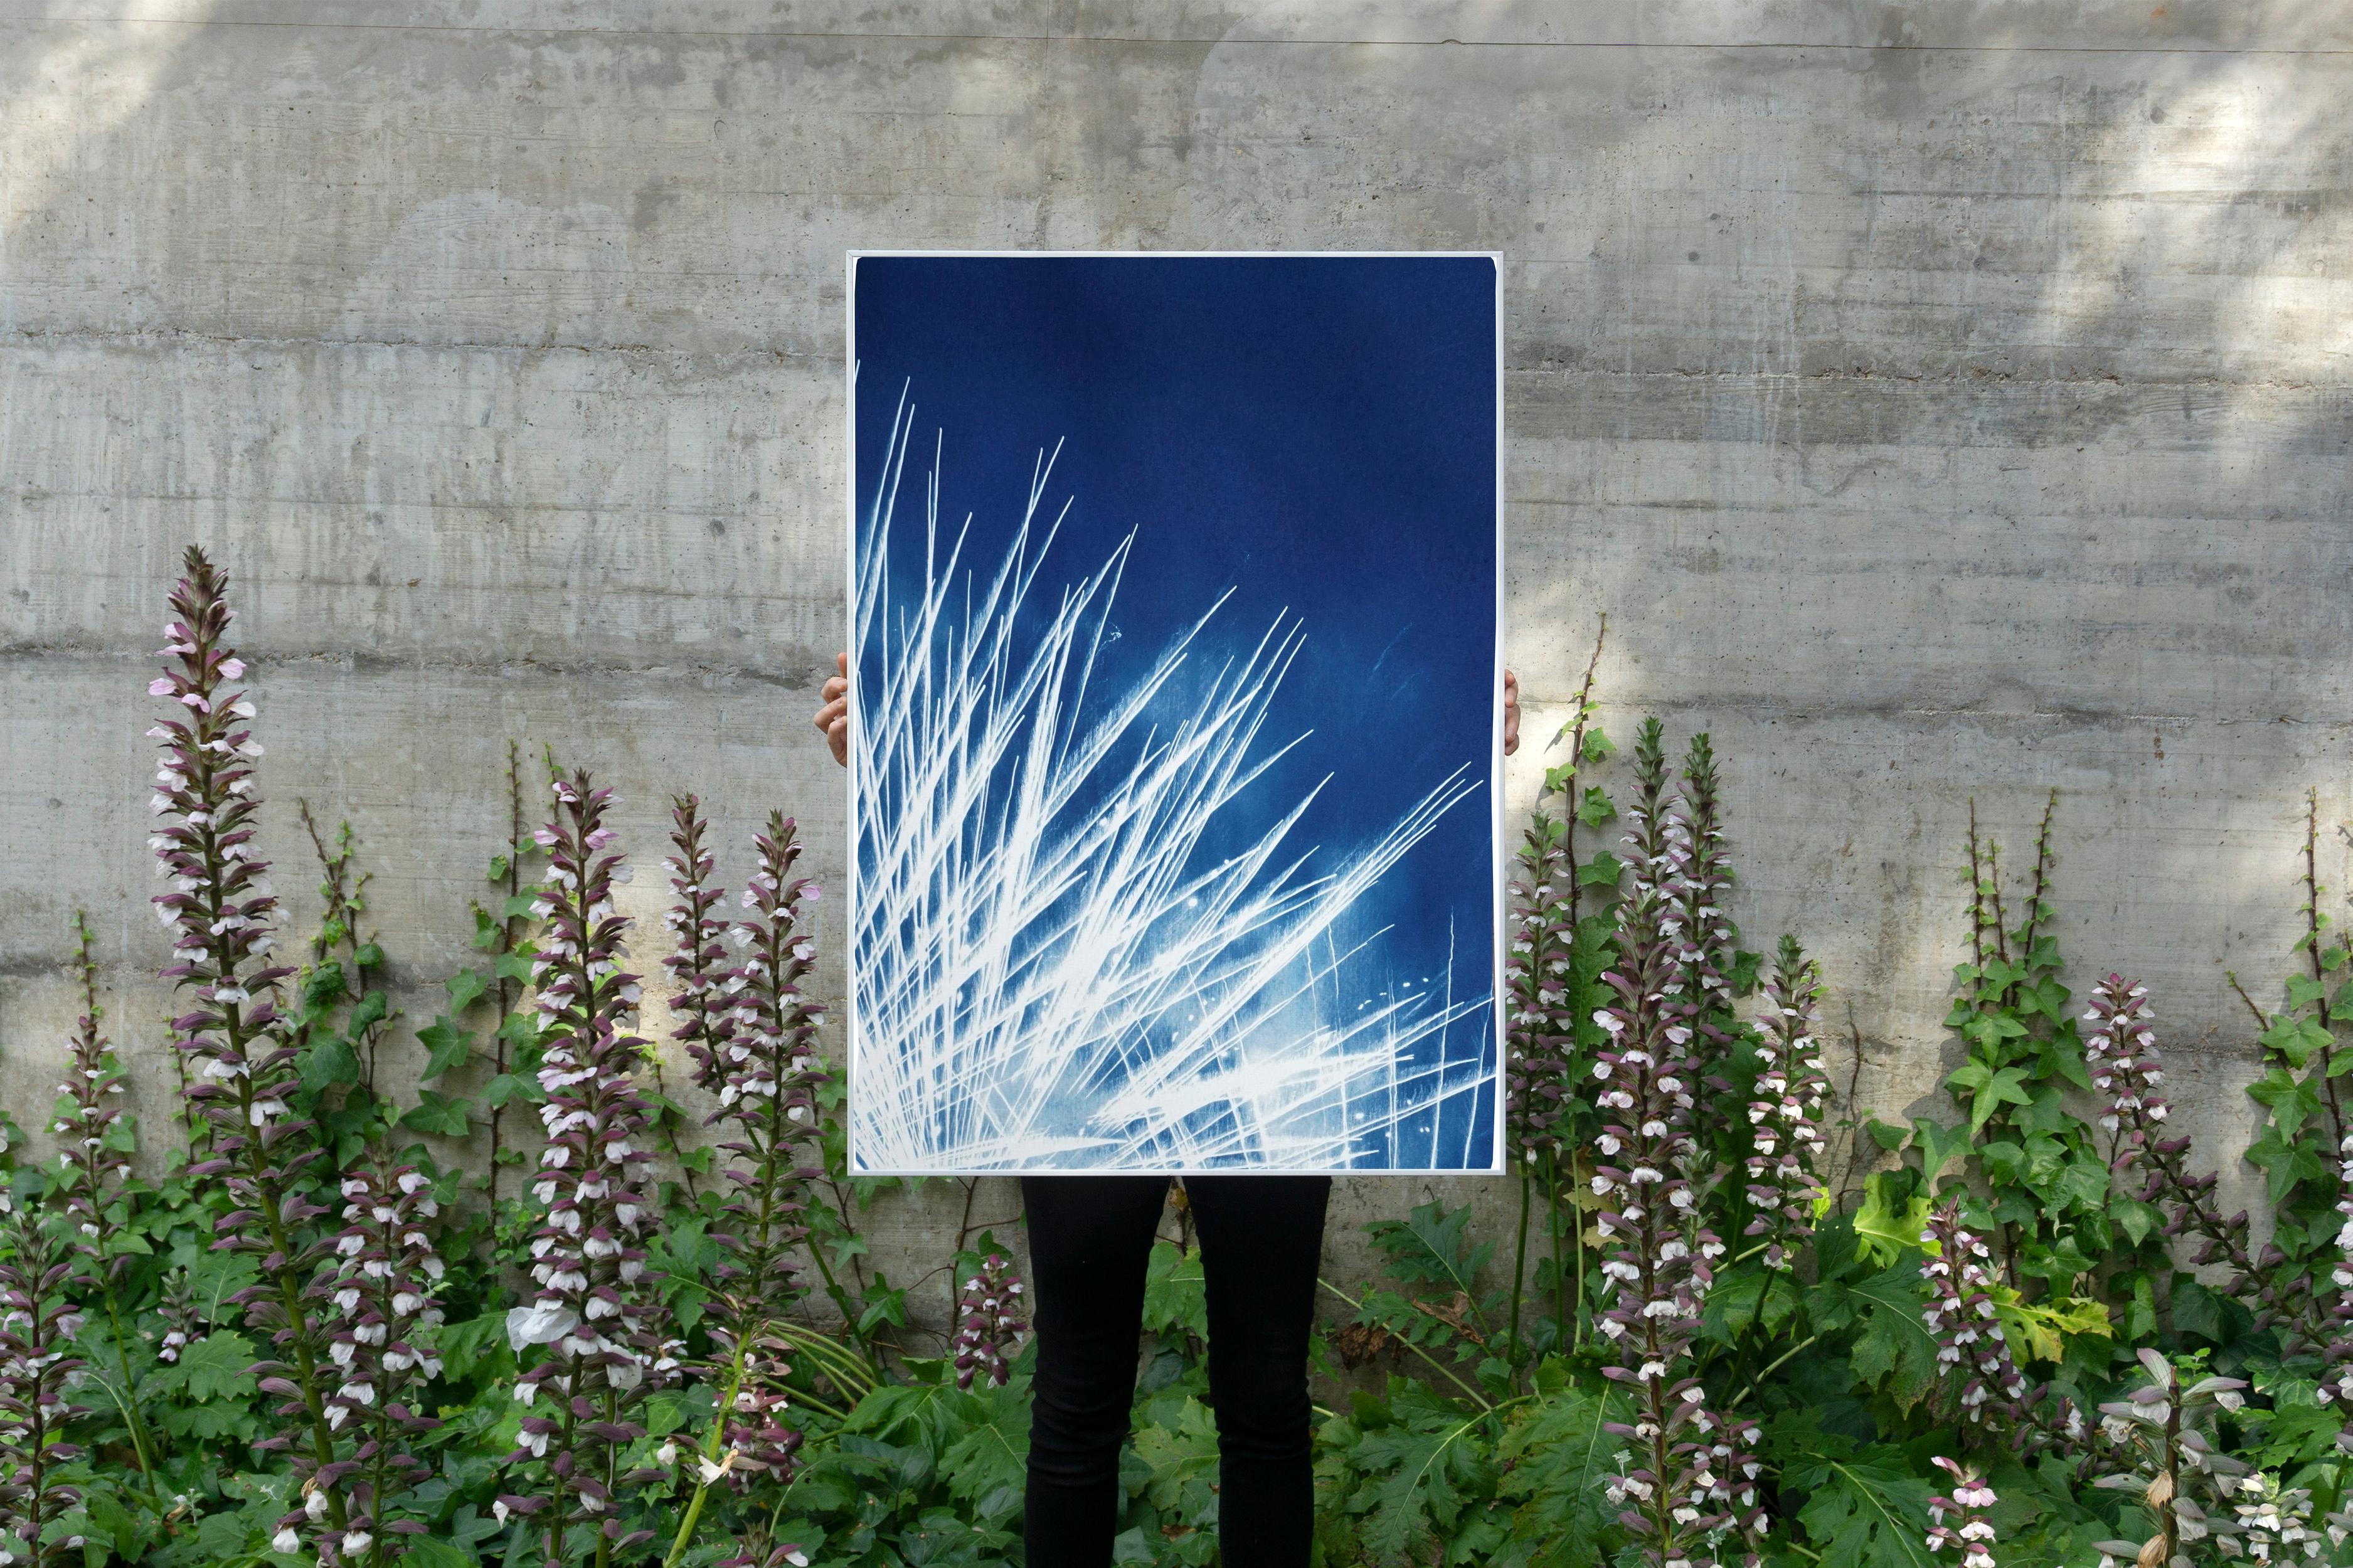 Nighttime Fireworks Flaring, Nocturnal Skyline, Abstract Lights in White & Blue For Sale 2